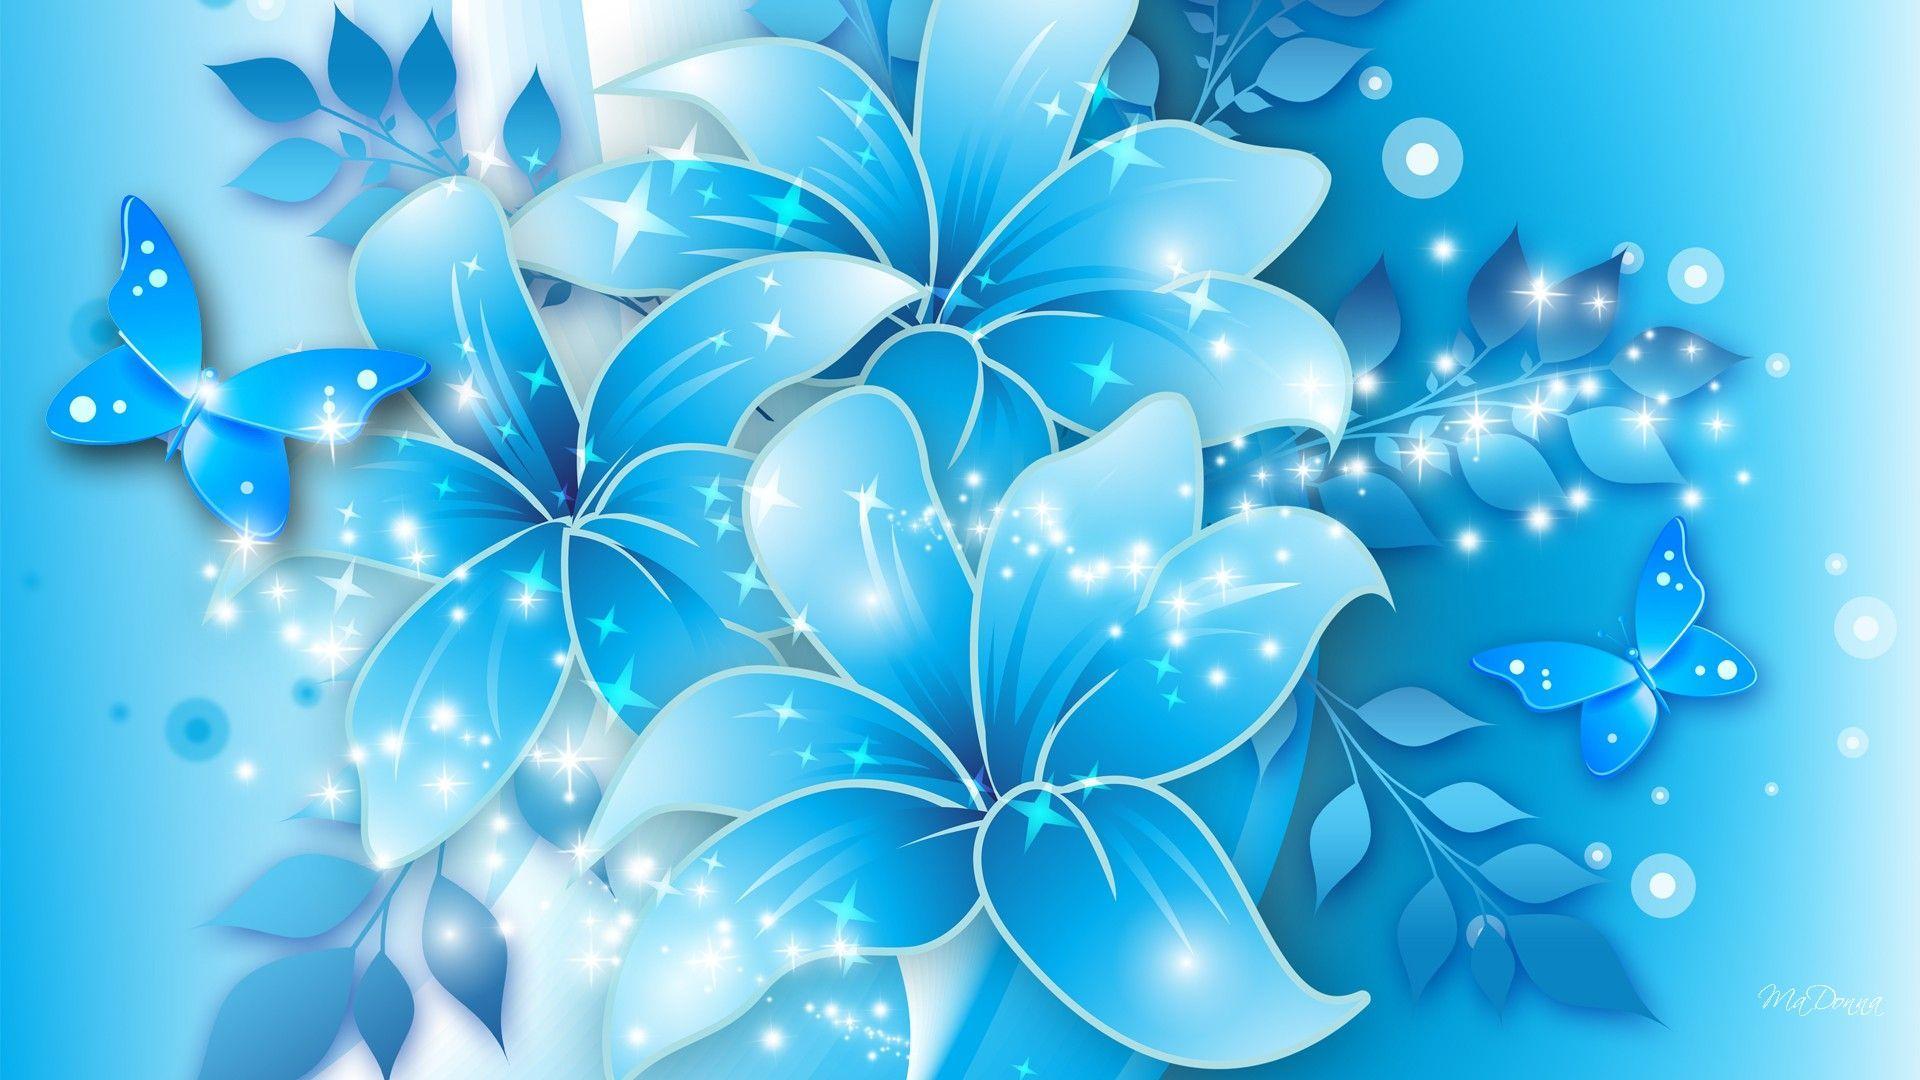 Blue Wallpaper Aesthetic  Iphone wallpaper Pretty wallpapers Cute  wallpapers